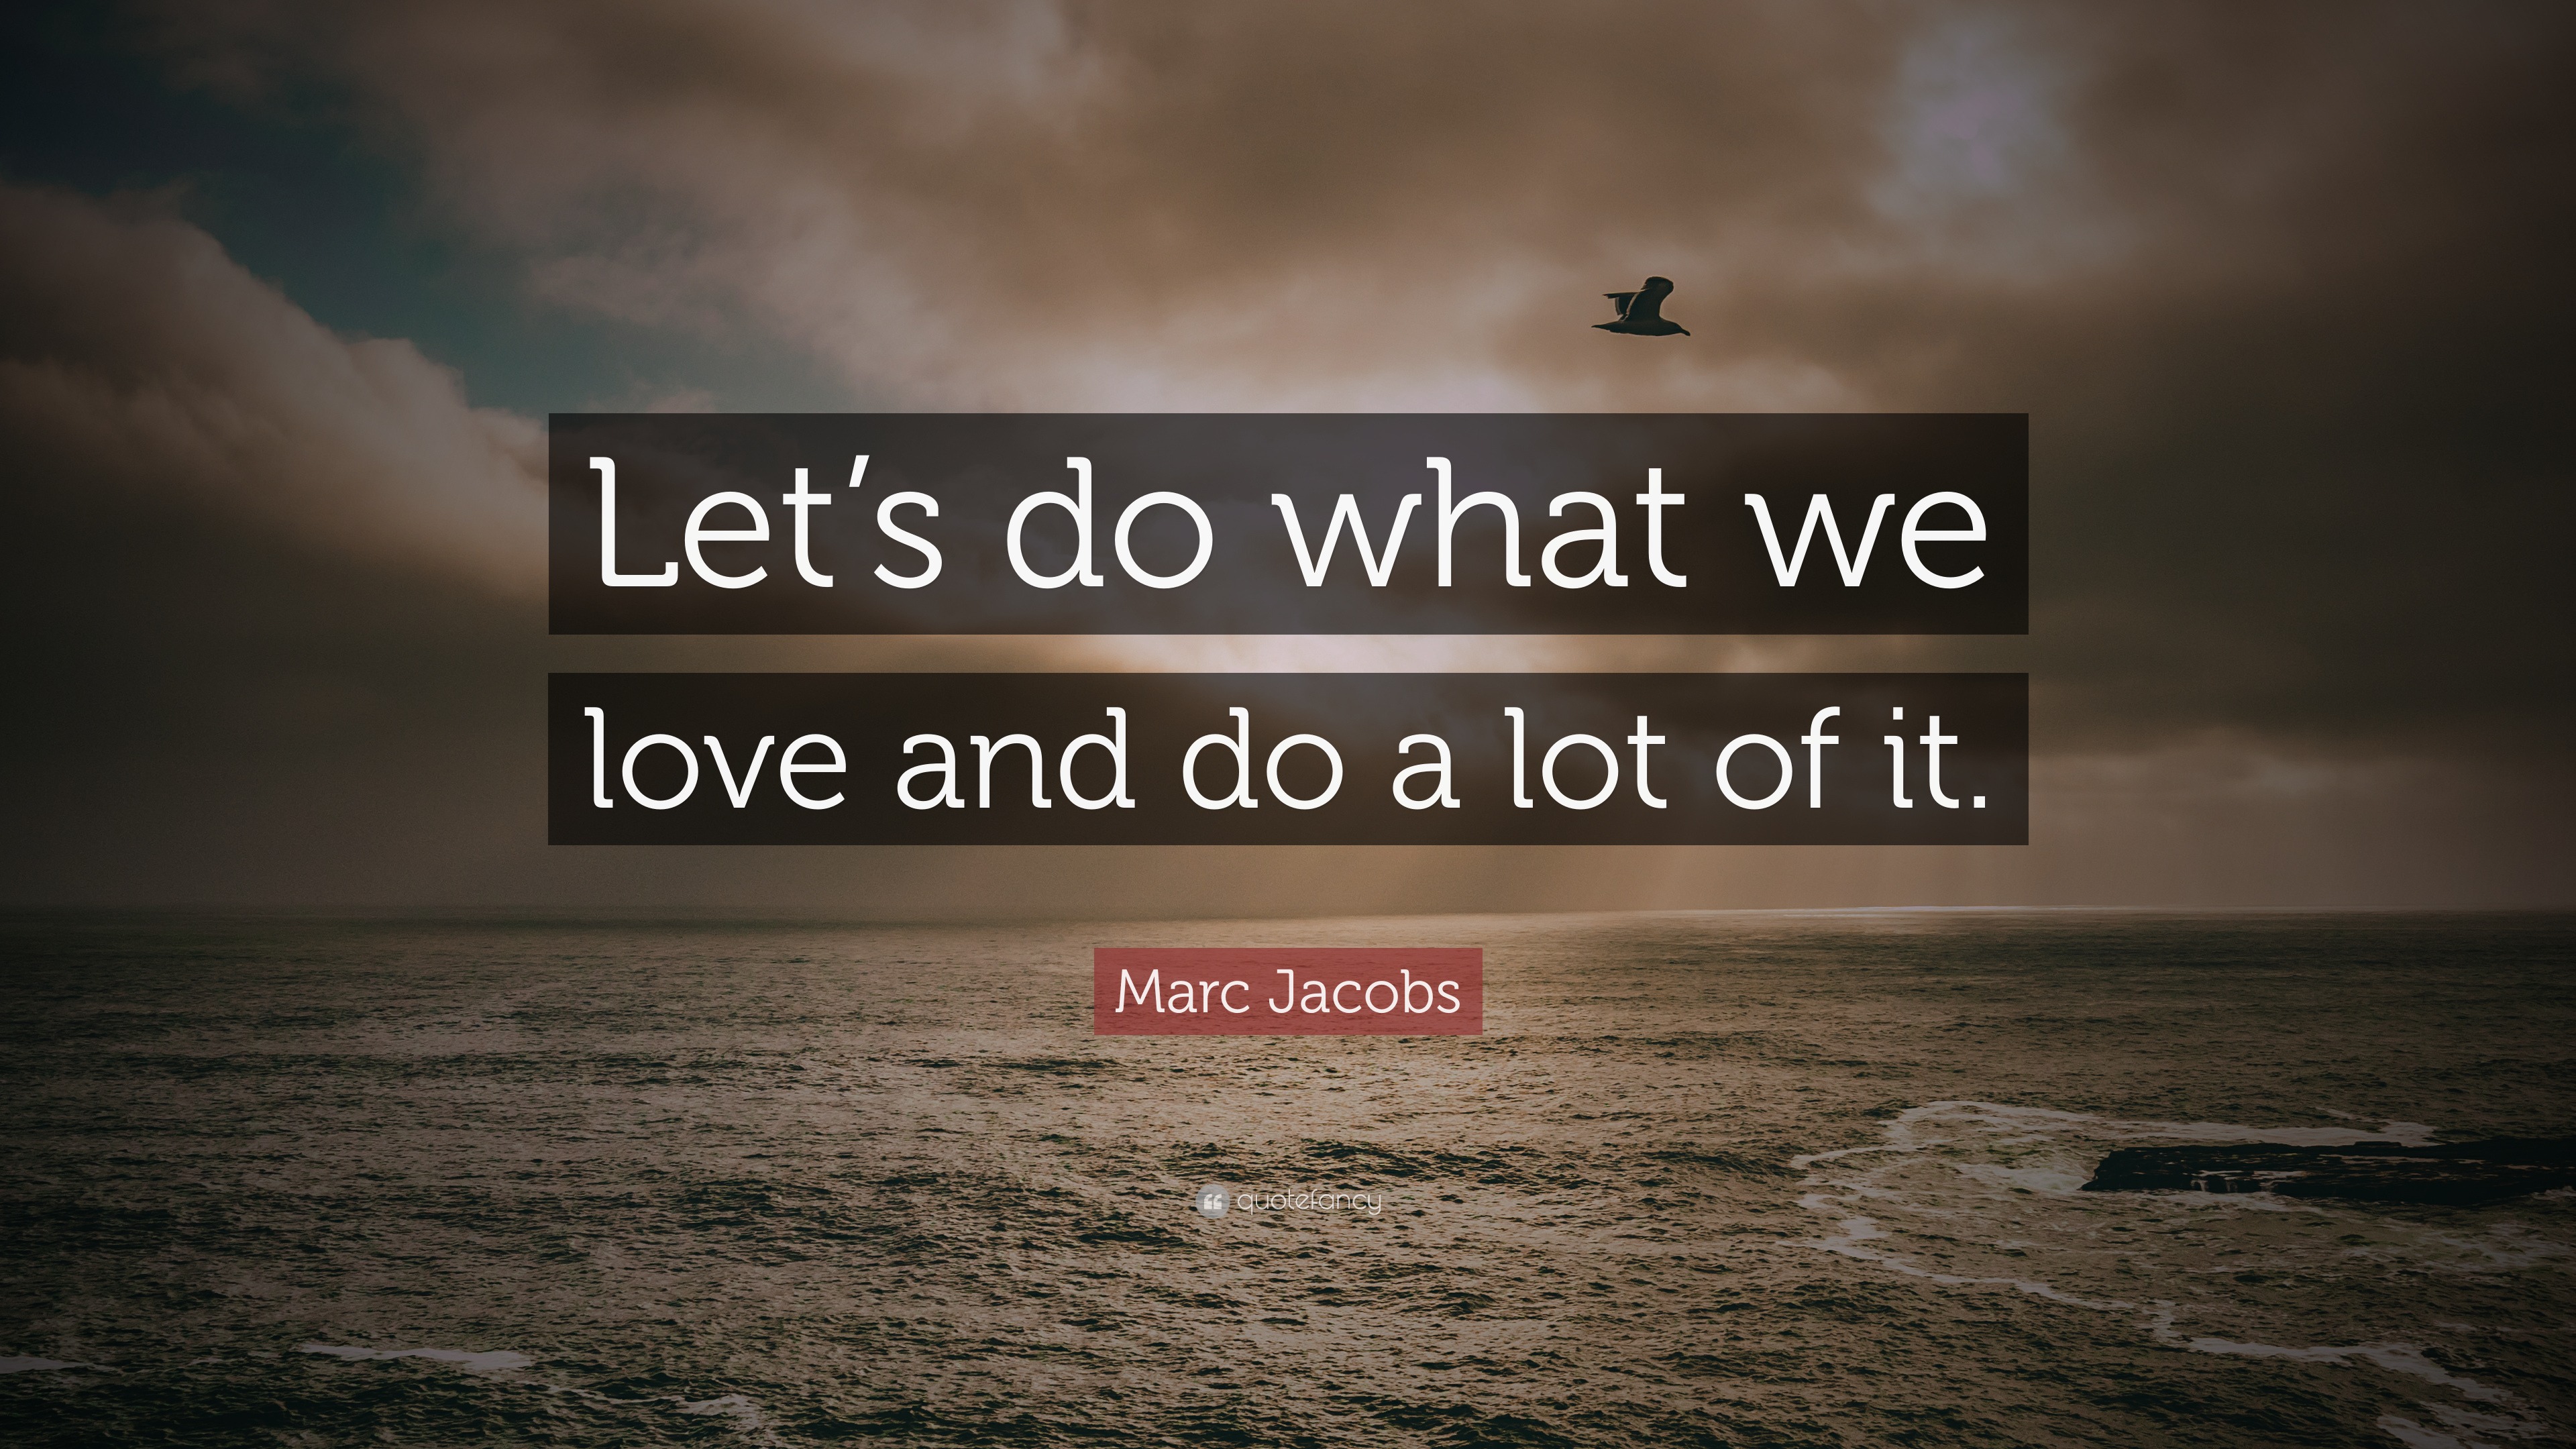 Marc Jacobs Quote: “Let's do what we love and do a lot of it.”